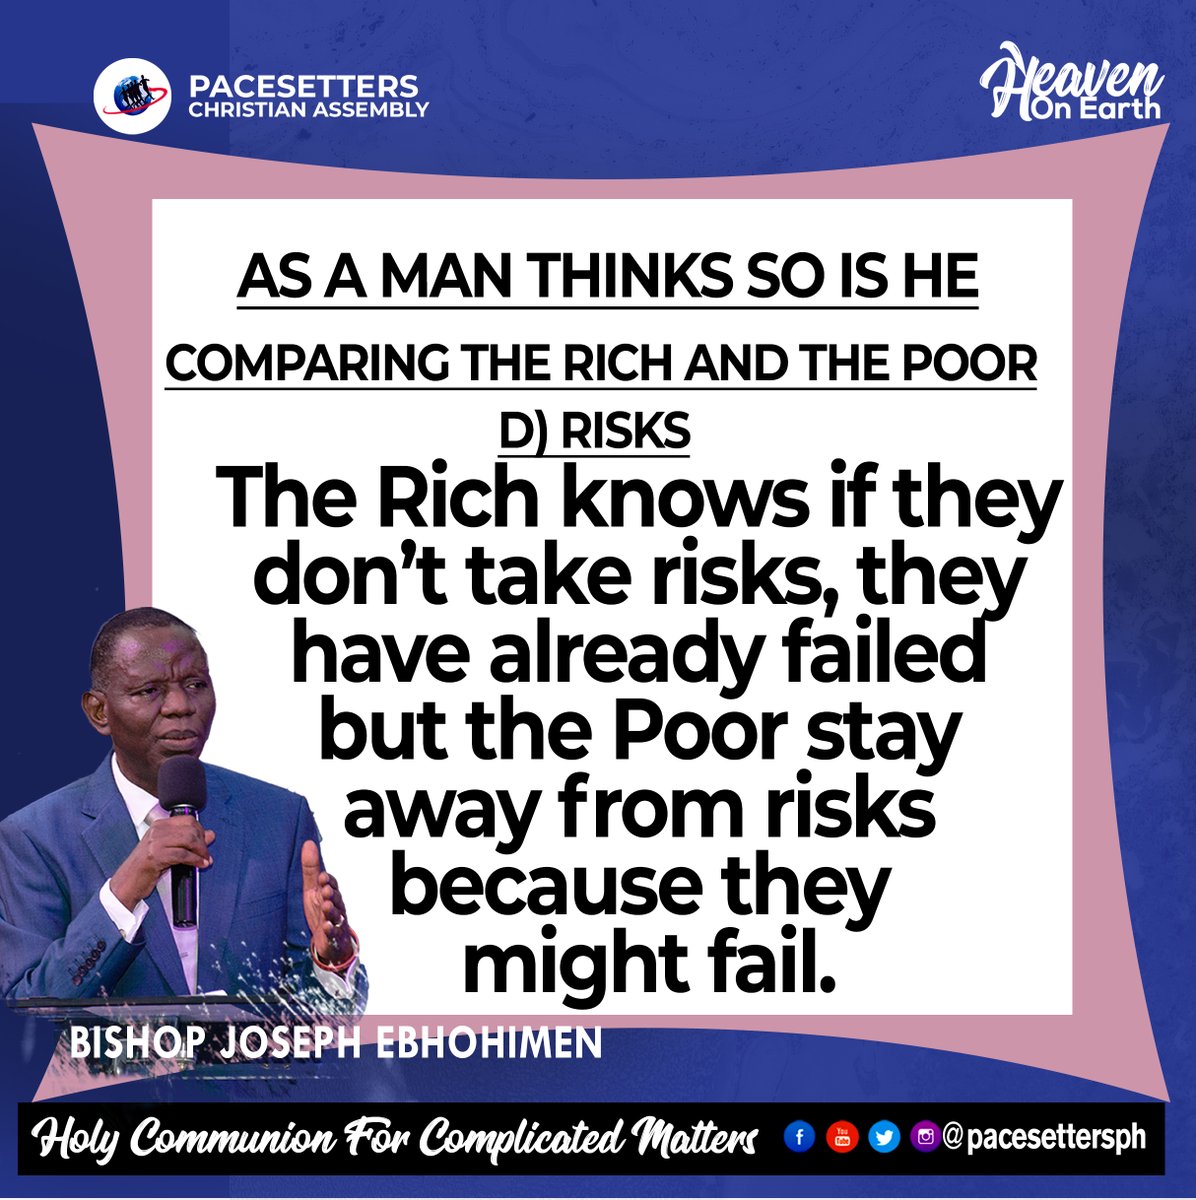 AS A MAN THINKS SO IS HE - COMPARING THE RICH AND THE POOR

#Asamanthinkssoishe
#Comparingtherichandthepoor
#Holycommunionforcomplicatedmatters
#EndofmonththanksgivingService
#Plantedbythewaters
#Heavenonearth
#Pacesettersph